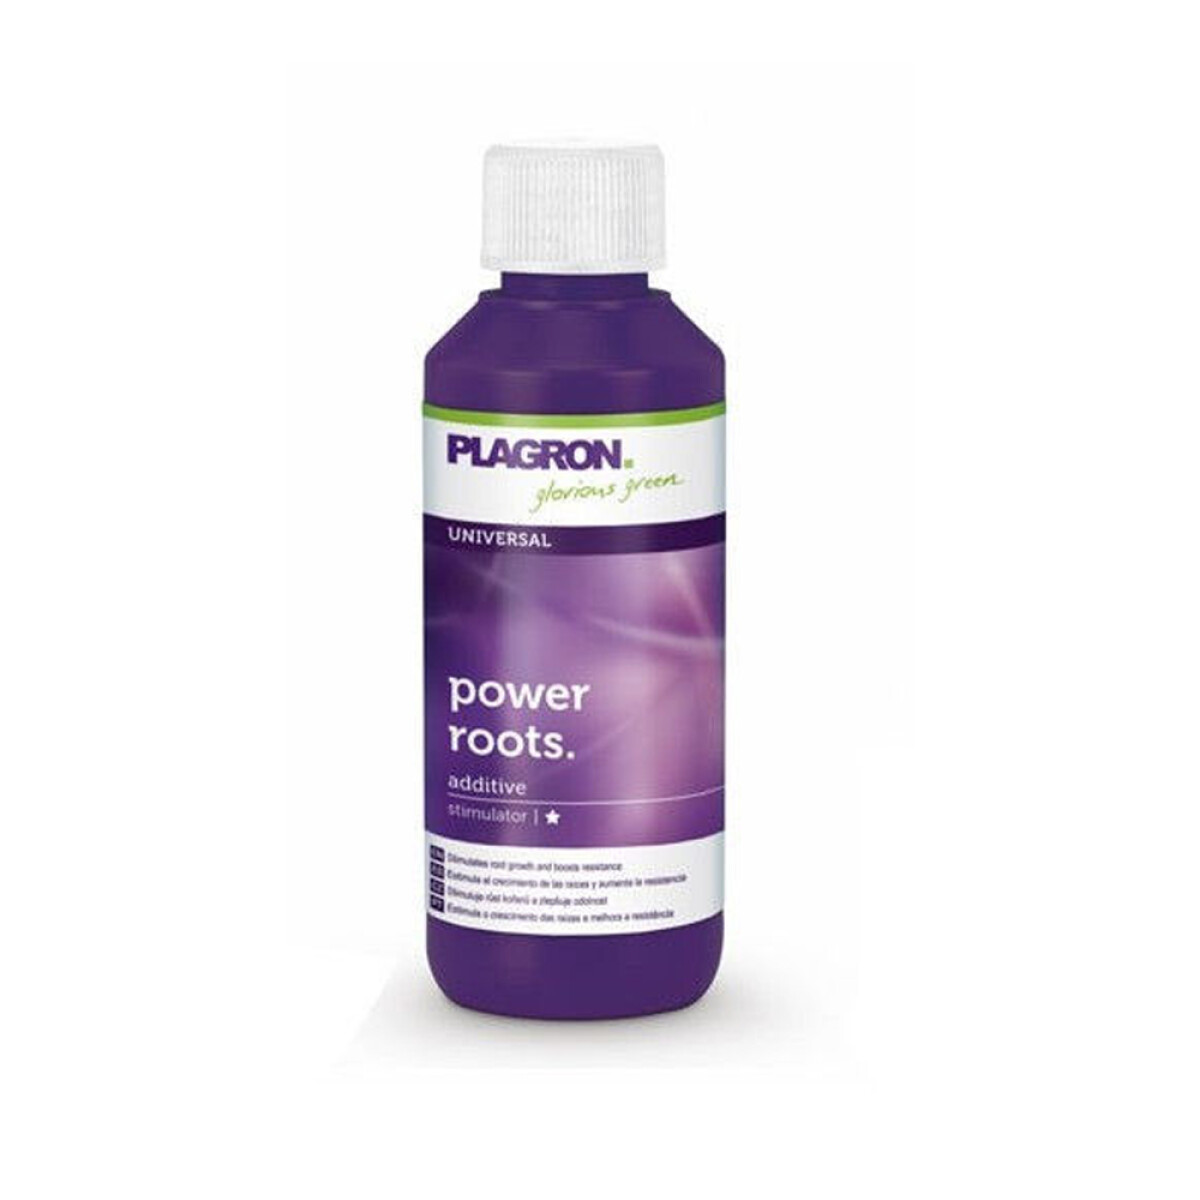 POWER ROOTS PLAGRON - 100ML 